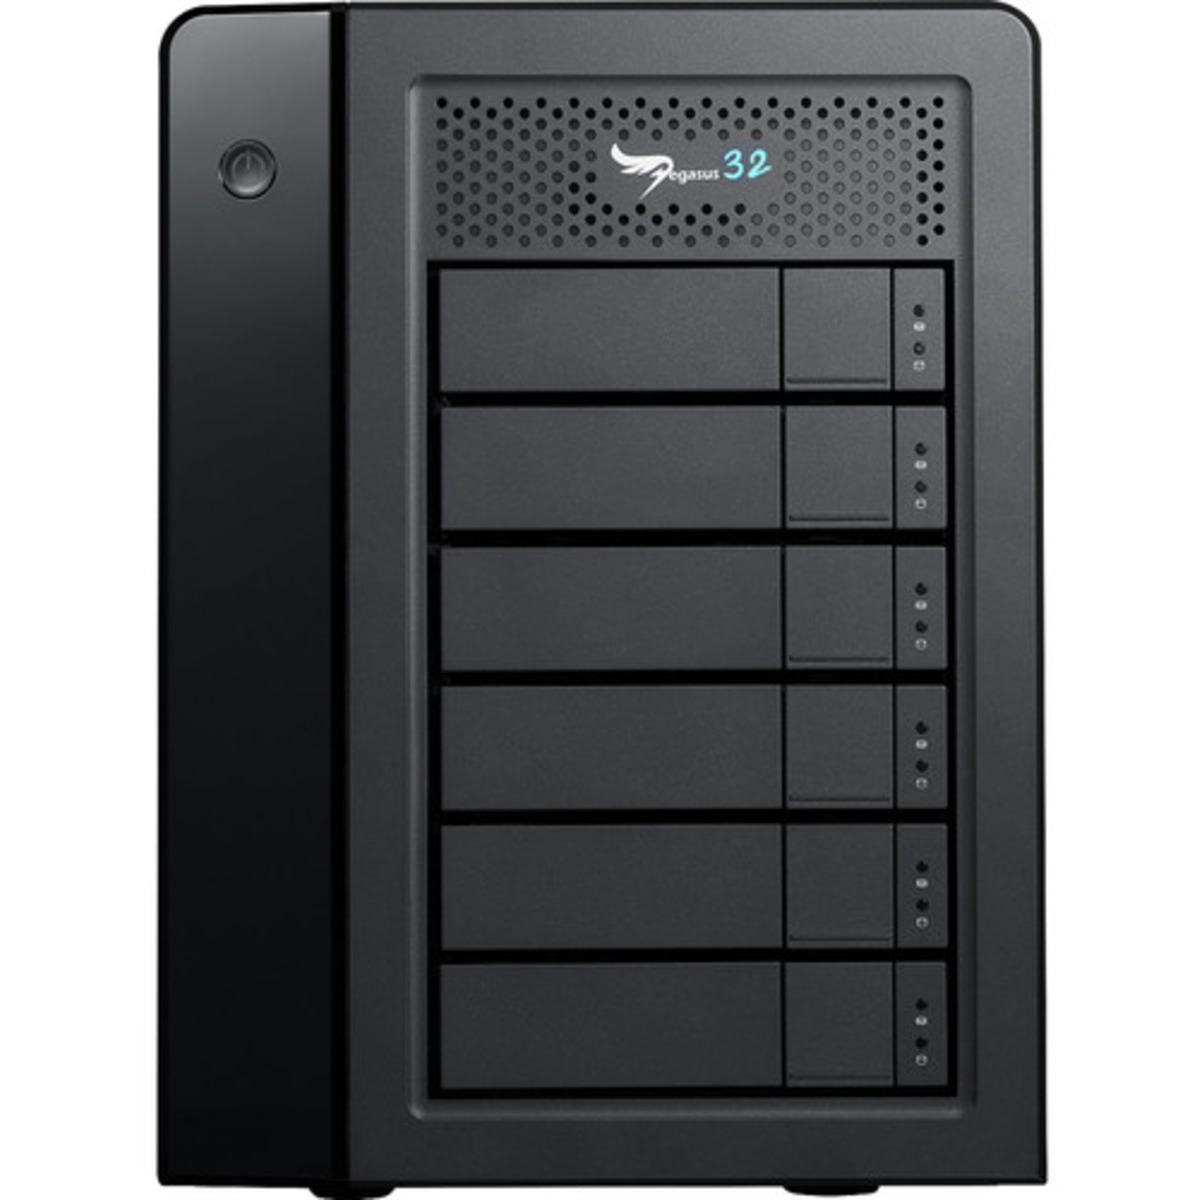 Promise Technology Pegasus32 R6 Thunderbolt 3 40tb 6-Bay Desktop Multimedia / Power User / Business DAS - Direct Attached Storage Device 5x8tb Seagate BarraCuda ST8000DM004 3.5 5400rpm SATA 6Gb/s HDD CONSUMER Class Drives Installed - Burn-In Tested Pegasus32 R6 Thunderbolt 3